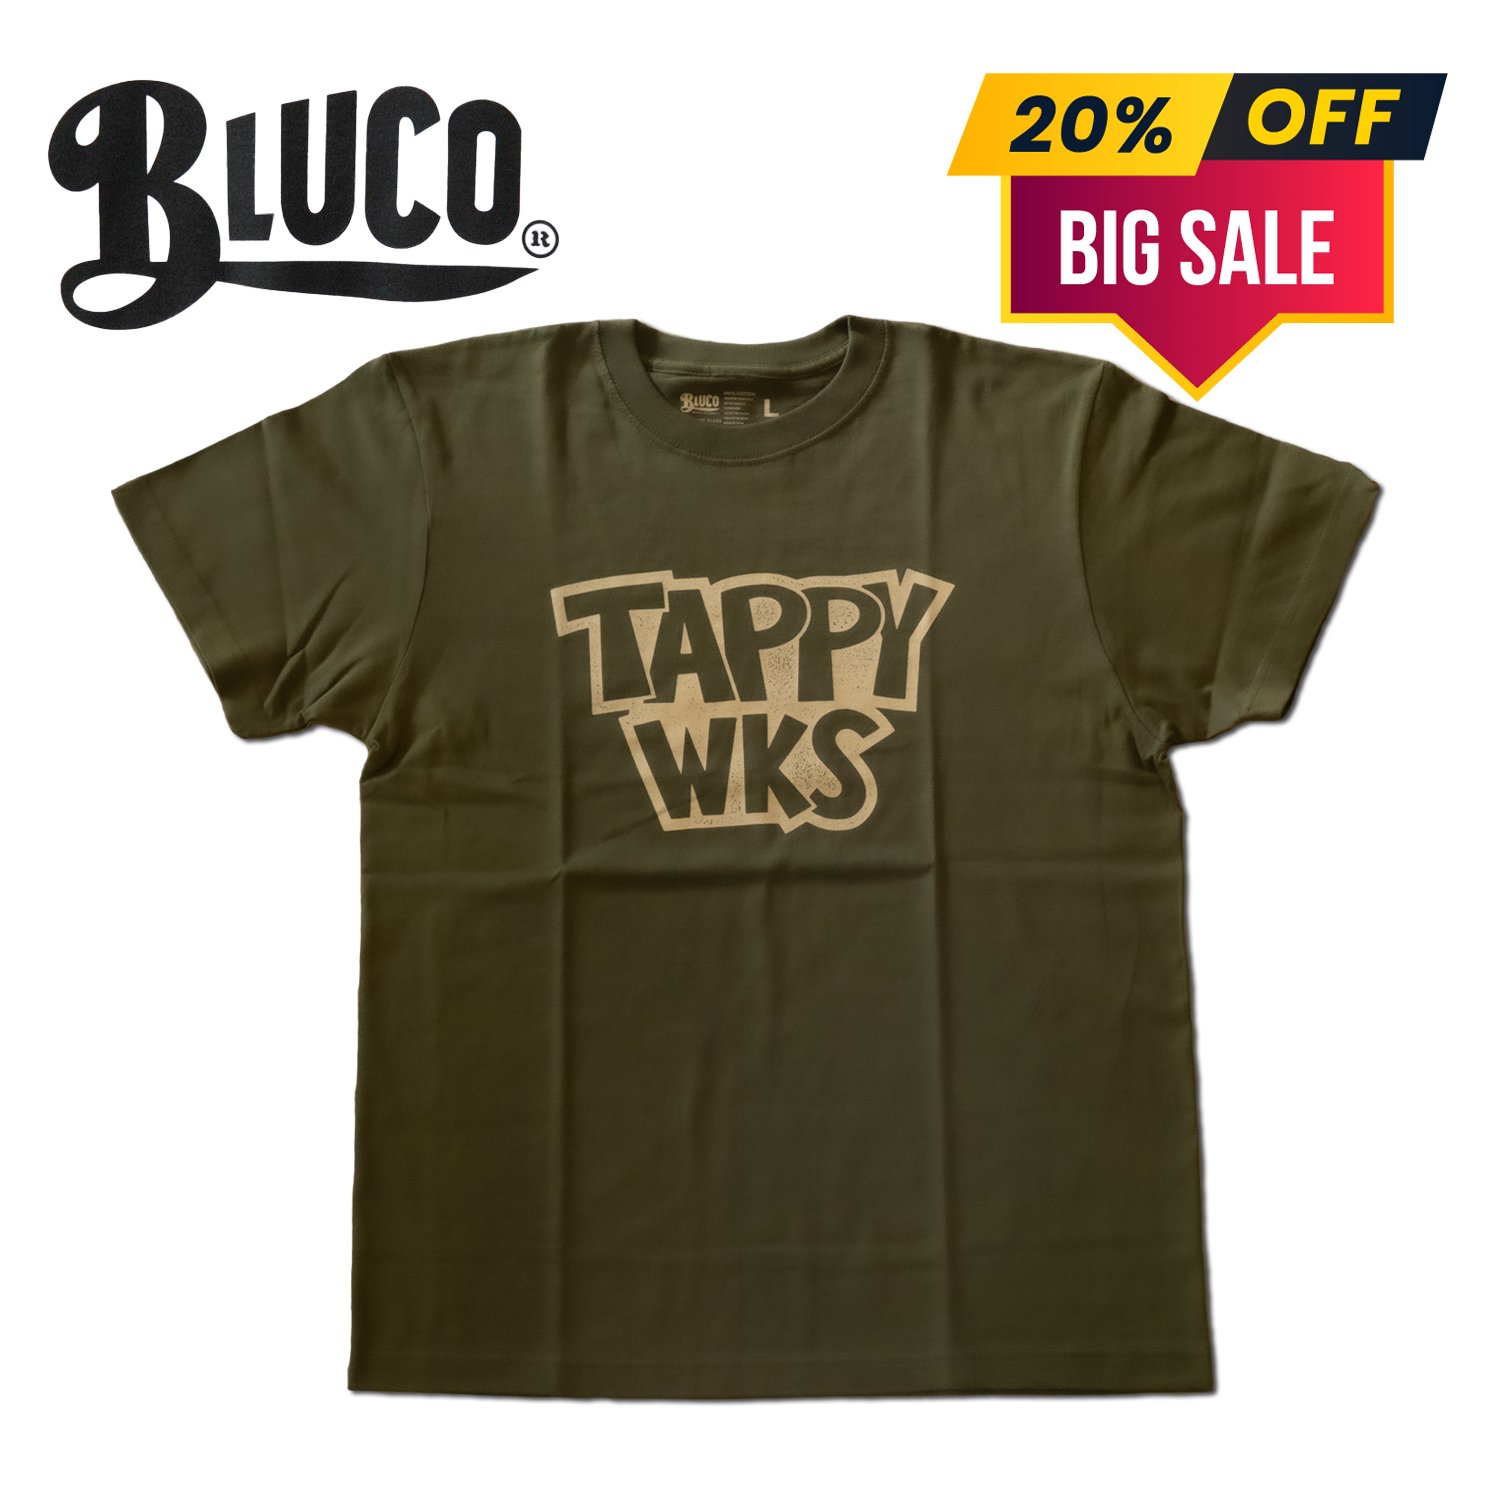 <img class='new_mark_img1' src='https://img.shop-pro.jp/img/new/icons16.gif' style='border:none;display:inline;margin:0px;padding:0px;width:auto;' />TAPPY WORKERS × BLUCO T-shirt (OLIVE / 2サイズ)